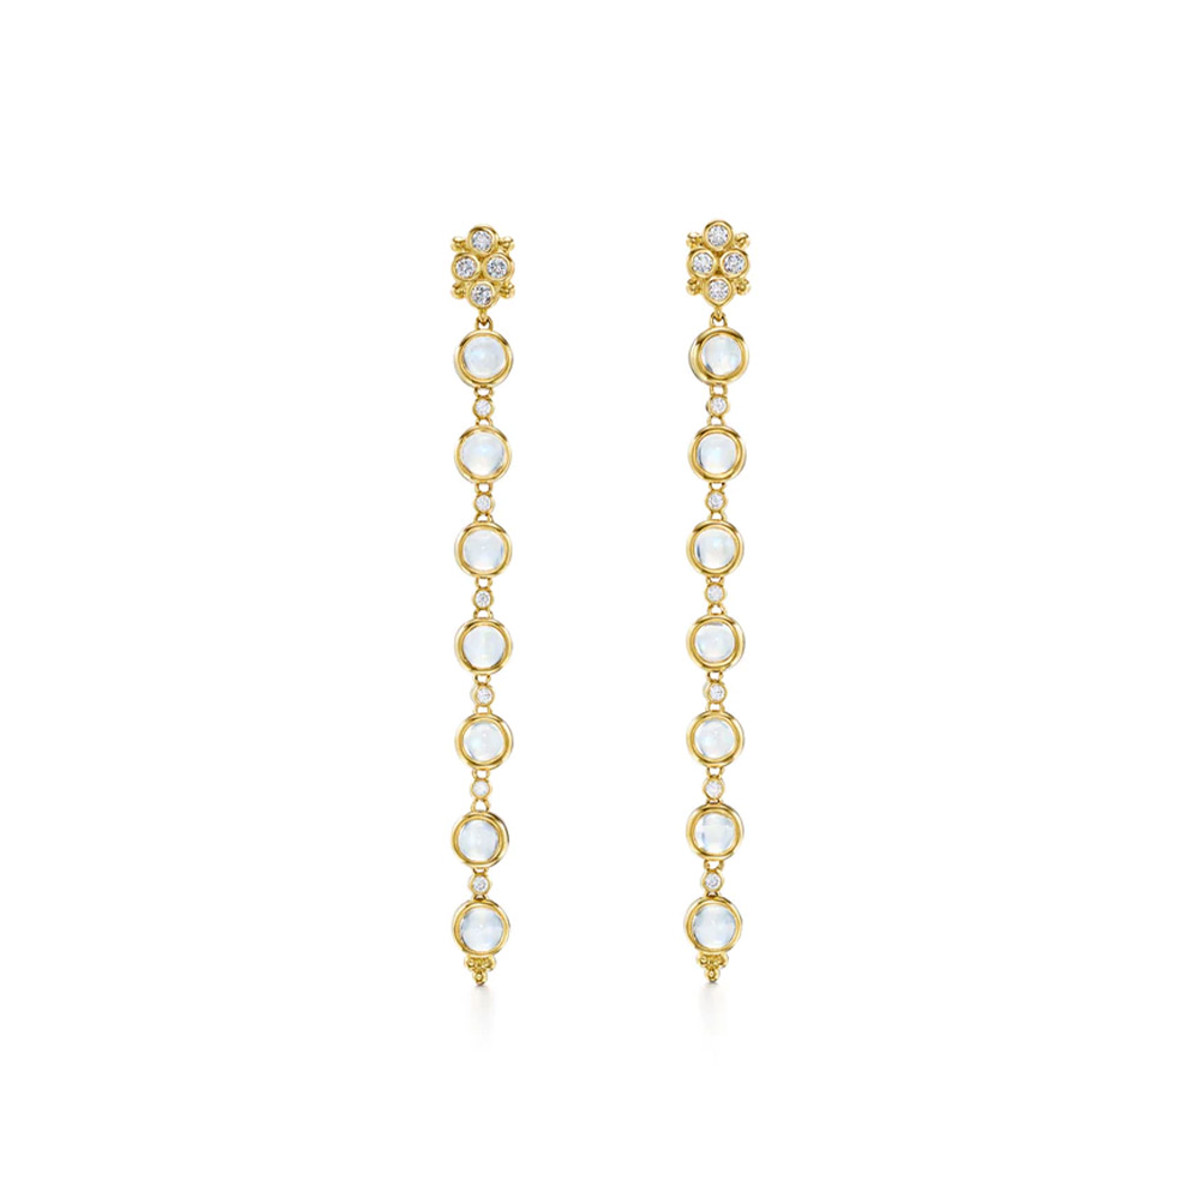 Temple St. Clair 18K Yellow Gold Moonshot Drop Earrings-61265 Product Image